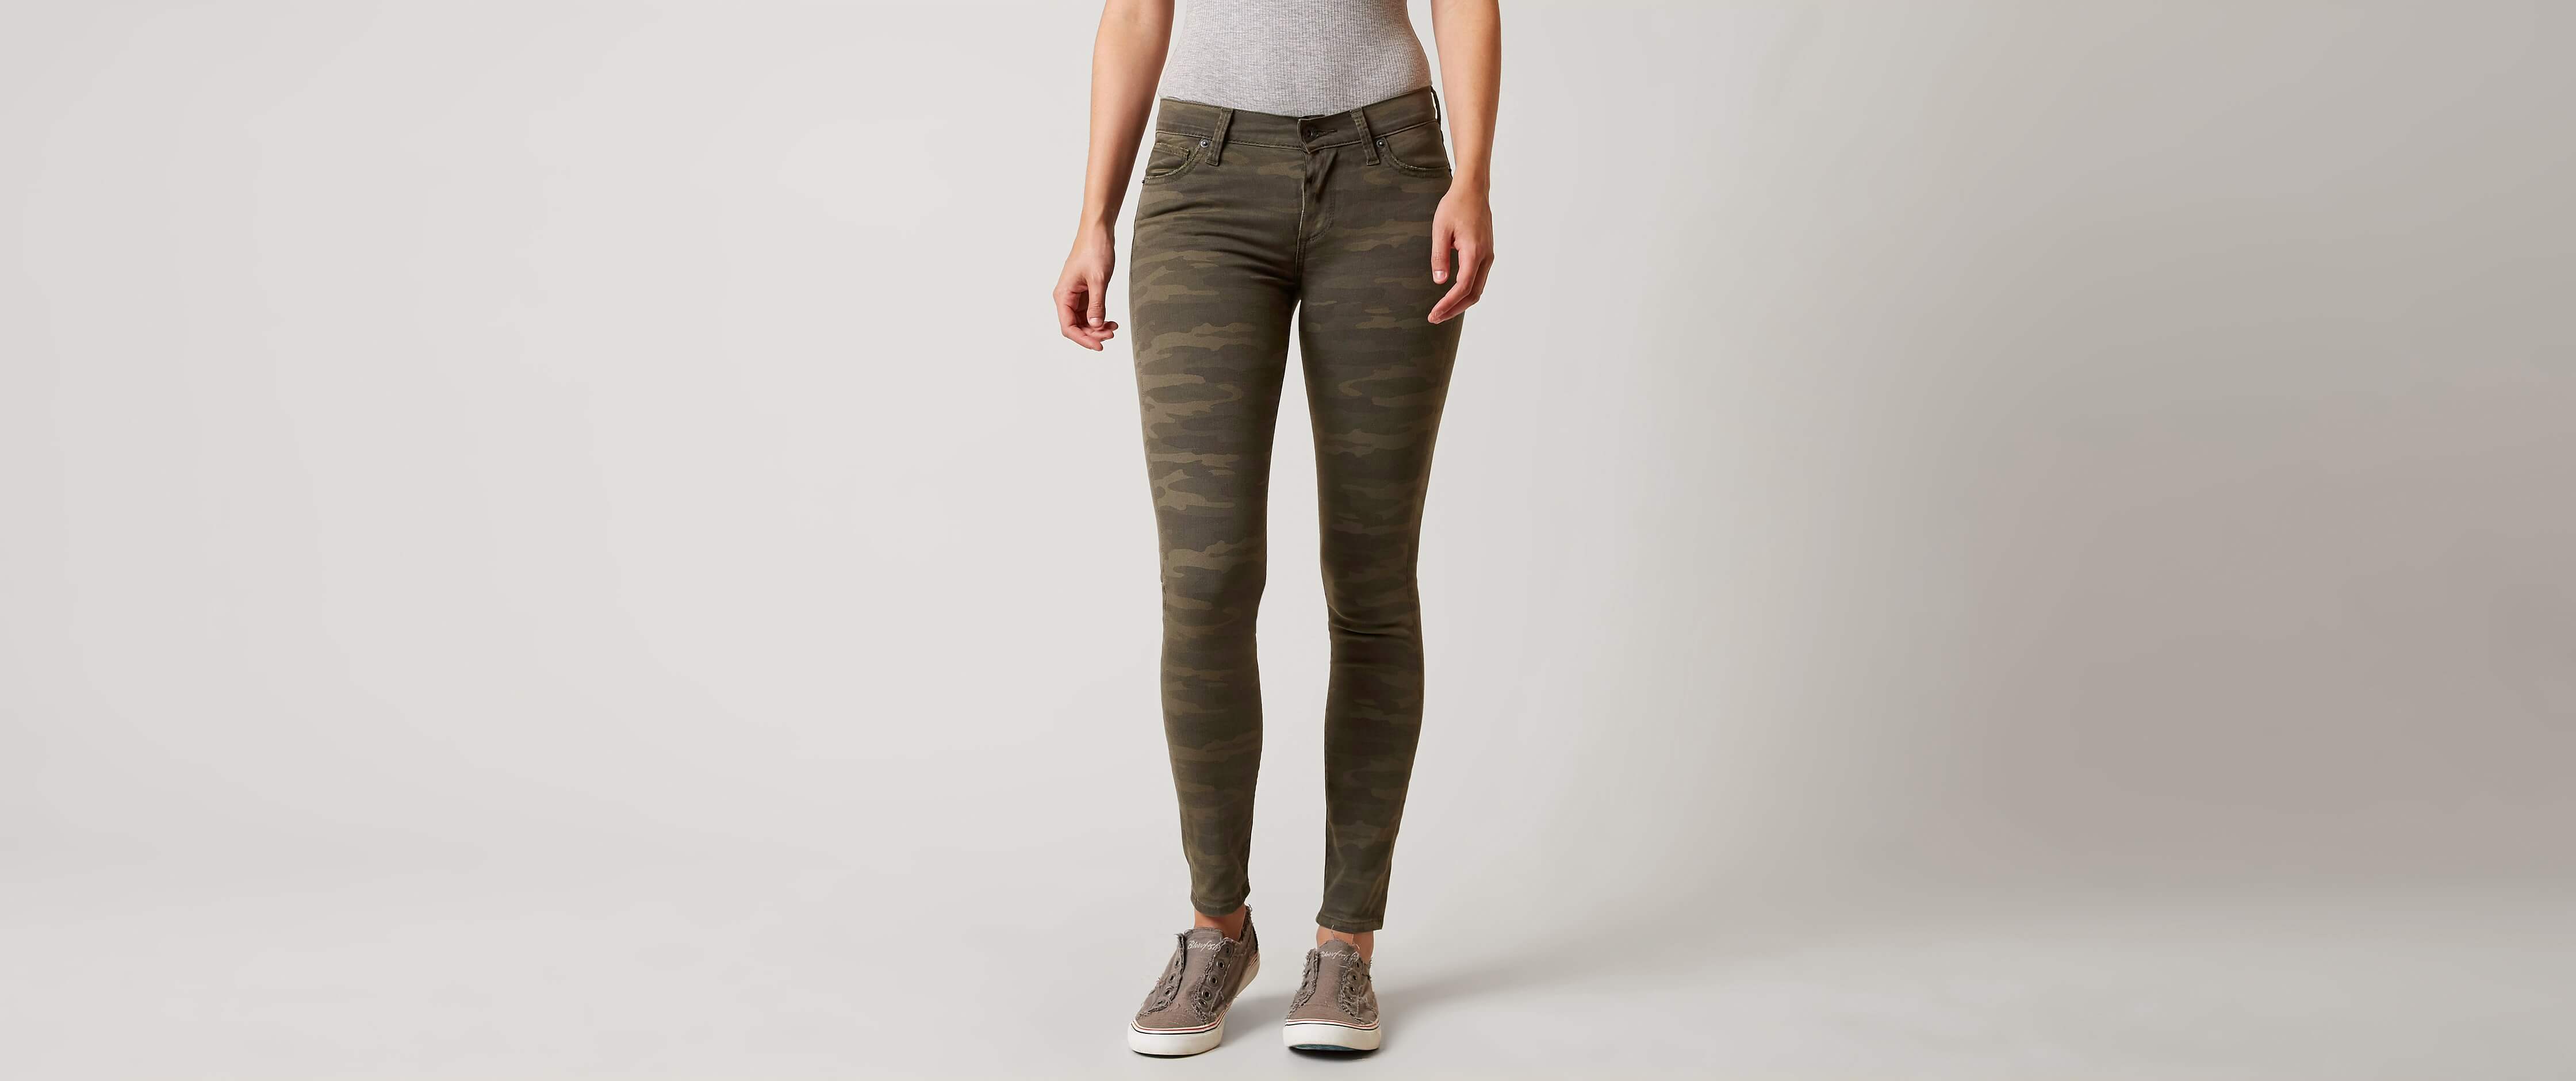 brooke jeans lucky brand